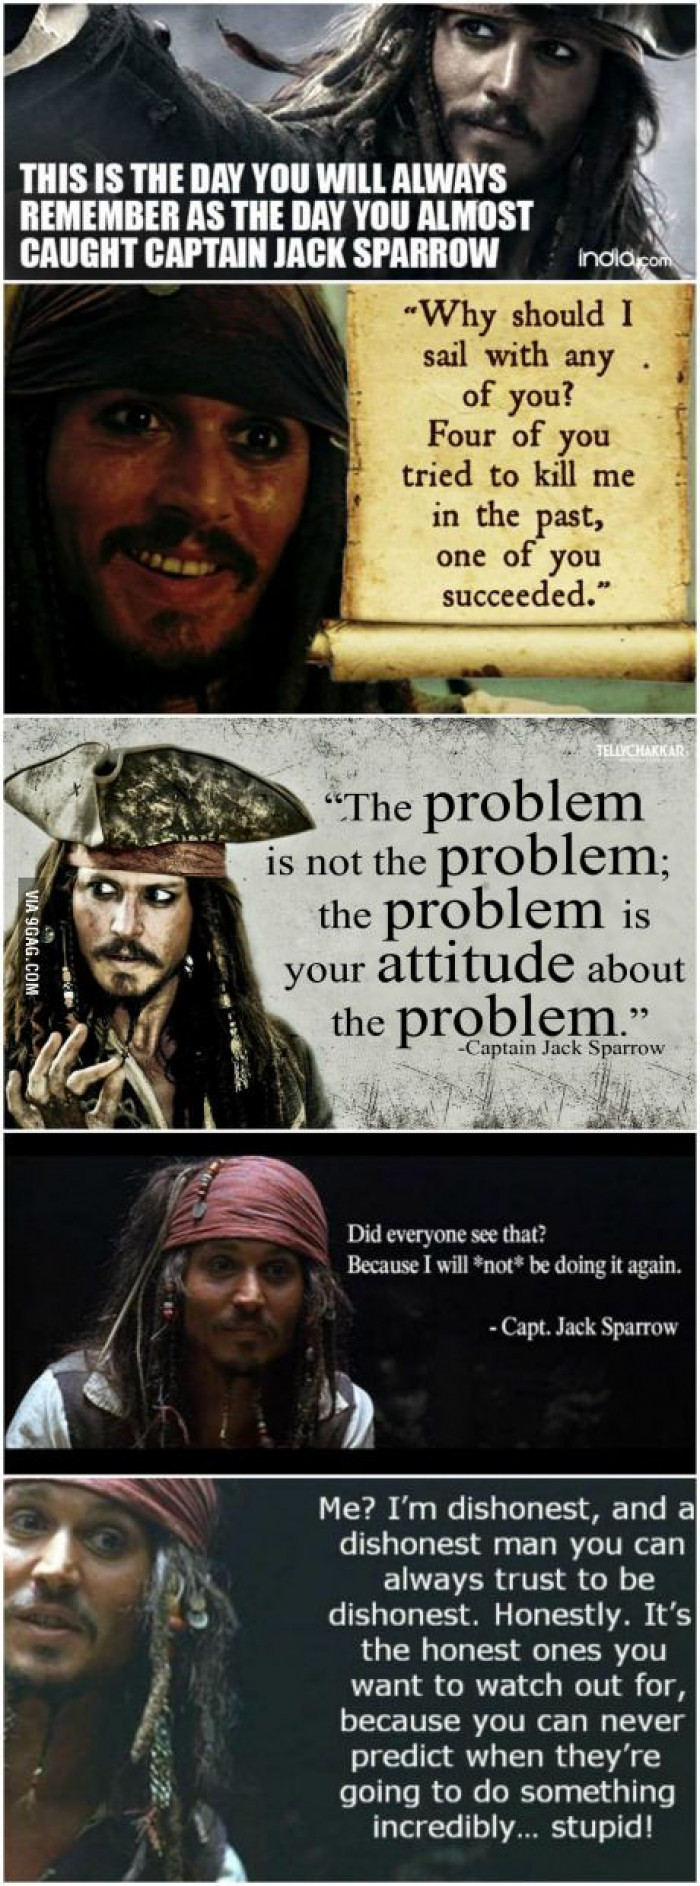 5 Awesome Captain Jack Sparrow Quotes That Will Instantly Brighten Your Day